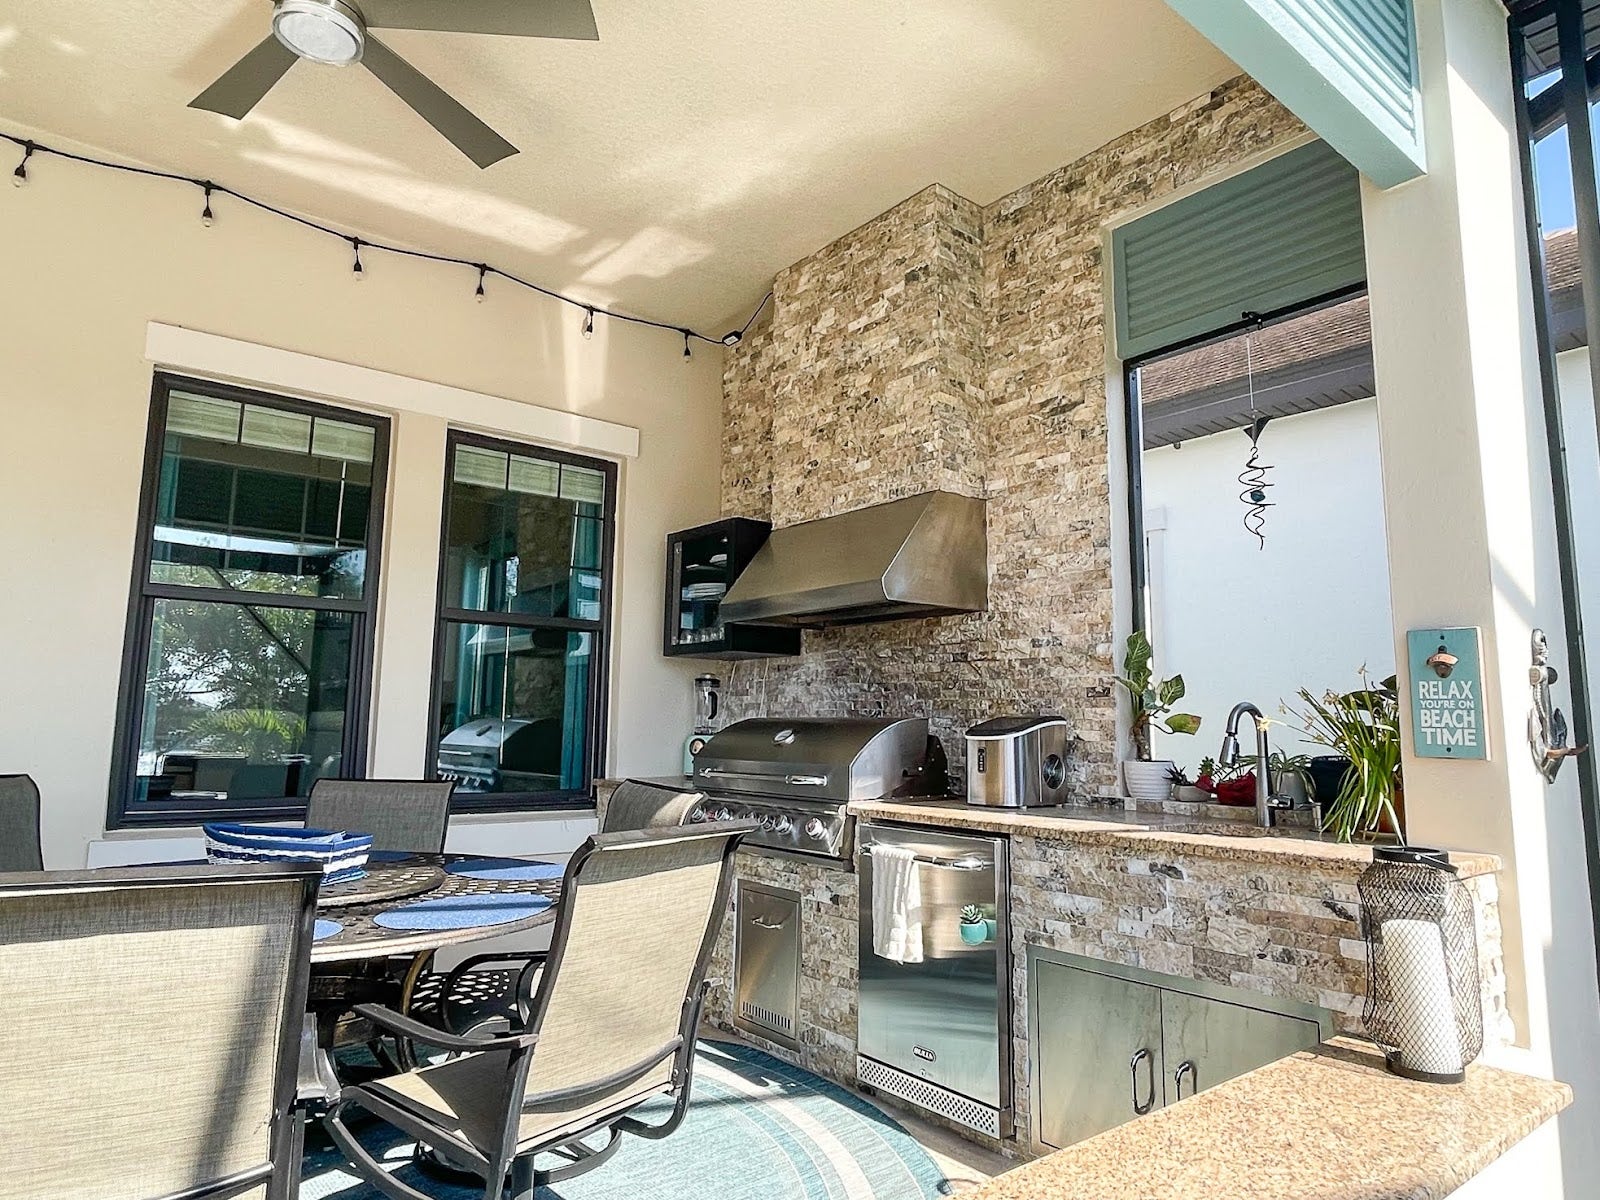 Proline range hood in an outdoor kitchen with stone finishes, including dining space and a relaxing 'beach time' sign - prolinerangehoods.com